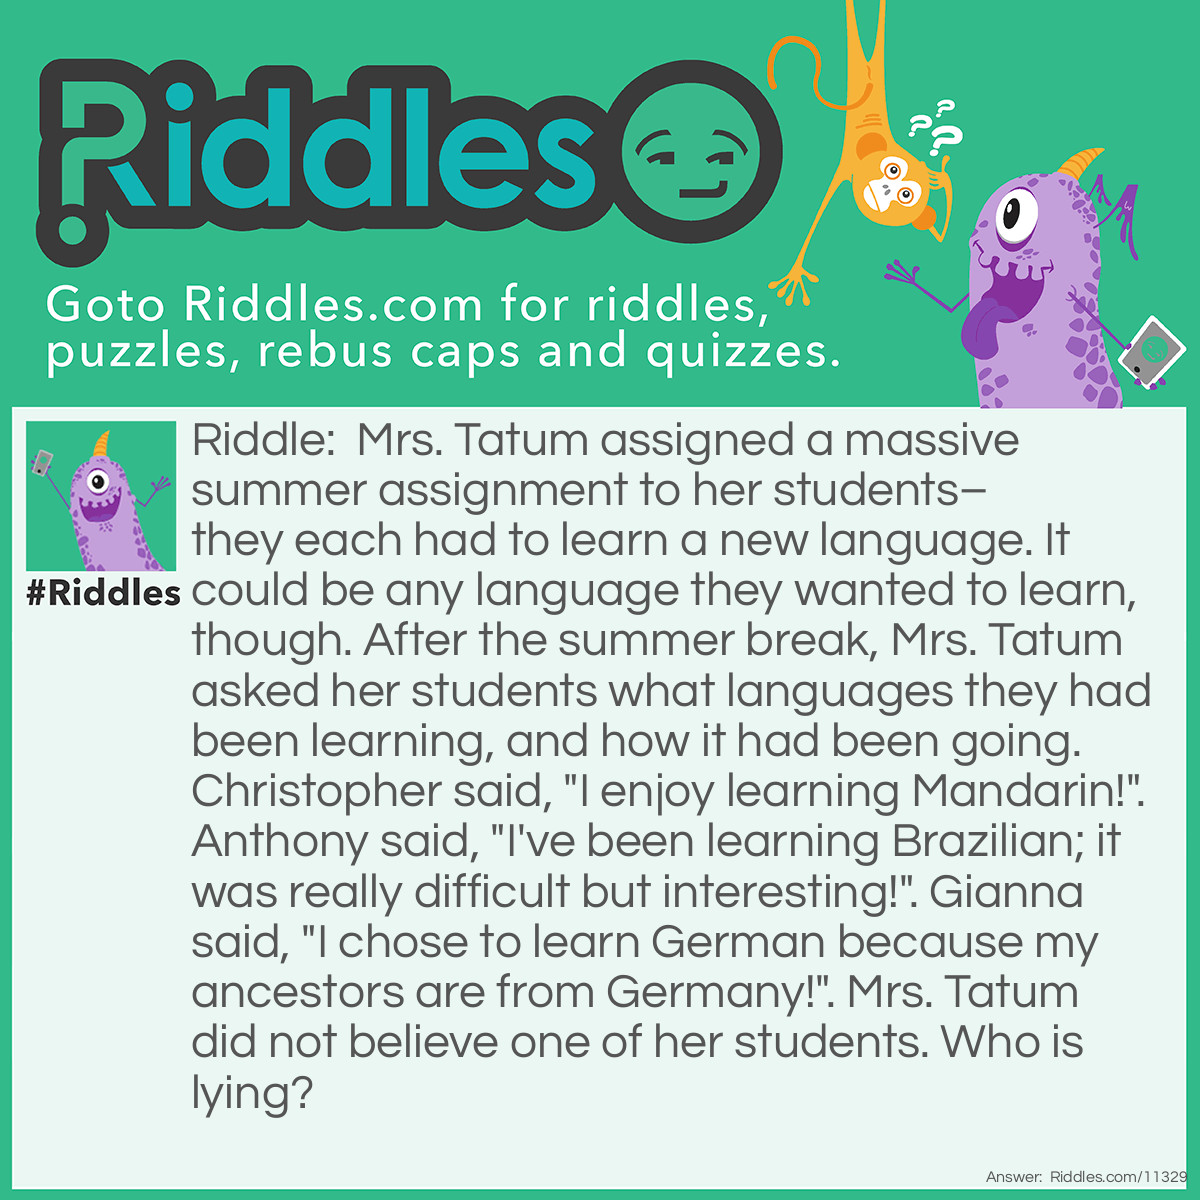 Riddle: Mrs. Tatum assigned a massive summer assignment to her students–they each had to learn a new language. It could be any language they wanted to learn, though. After the summer break, Mrs. Tatum asked her students what languages they had been learning, and how it had been going. Christopher said, "I enjoy learning Mandarin!". Anthony said, "I've been learning Brazilian; it was really difficult but interesting!". Gianna said, "I chose to learn German because my ancestors are from Germany!". Mrs. Tatum did not believe one of her students. Who is lying? Answer: Anthony is lying. He couldn't be learning Brazilian because this "language" doesn't exist; people speak Portuguese in Brazil.